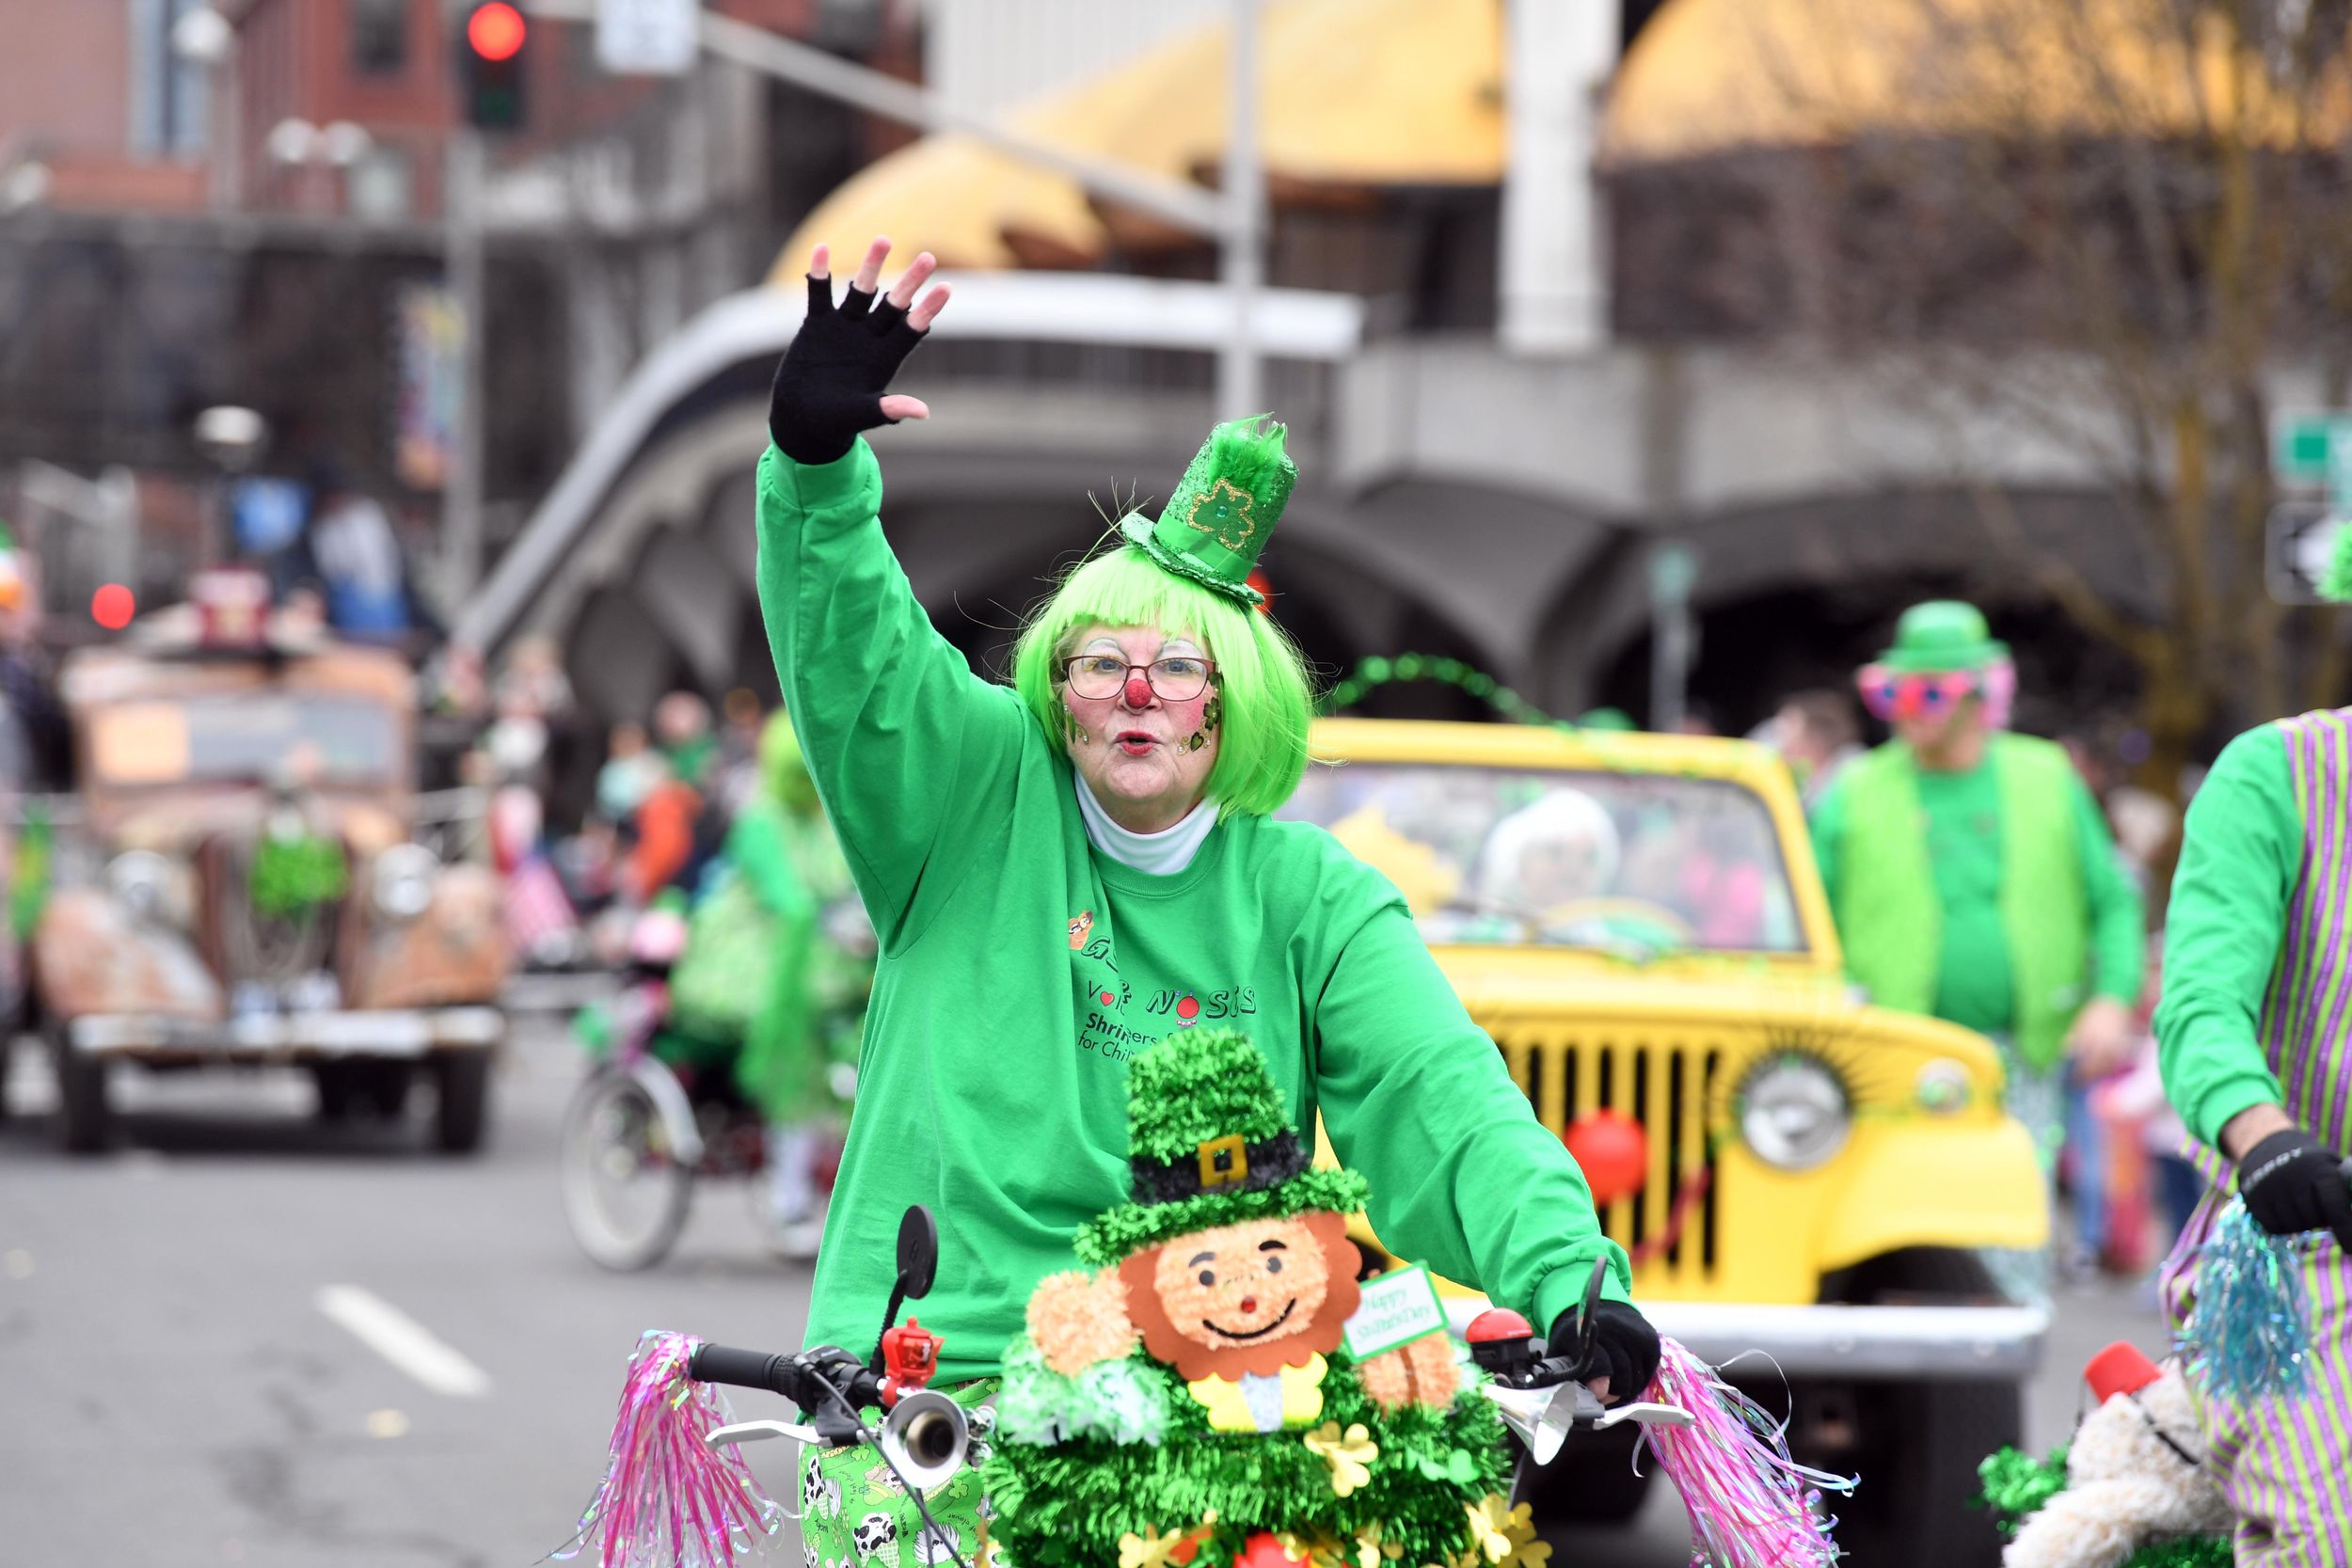 St. Patrick’s Day Parade signup underway The SpokesmanReview